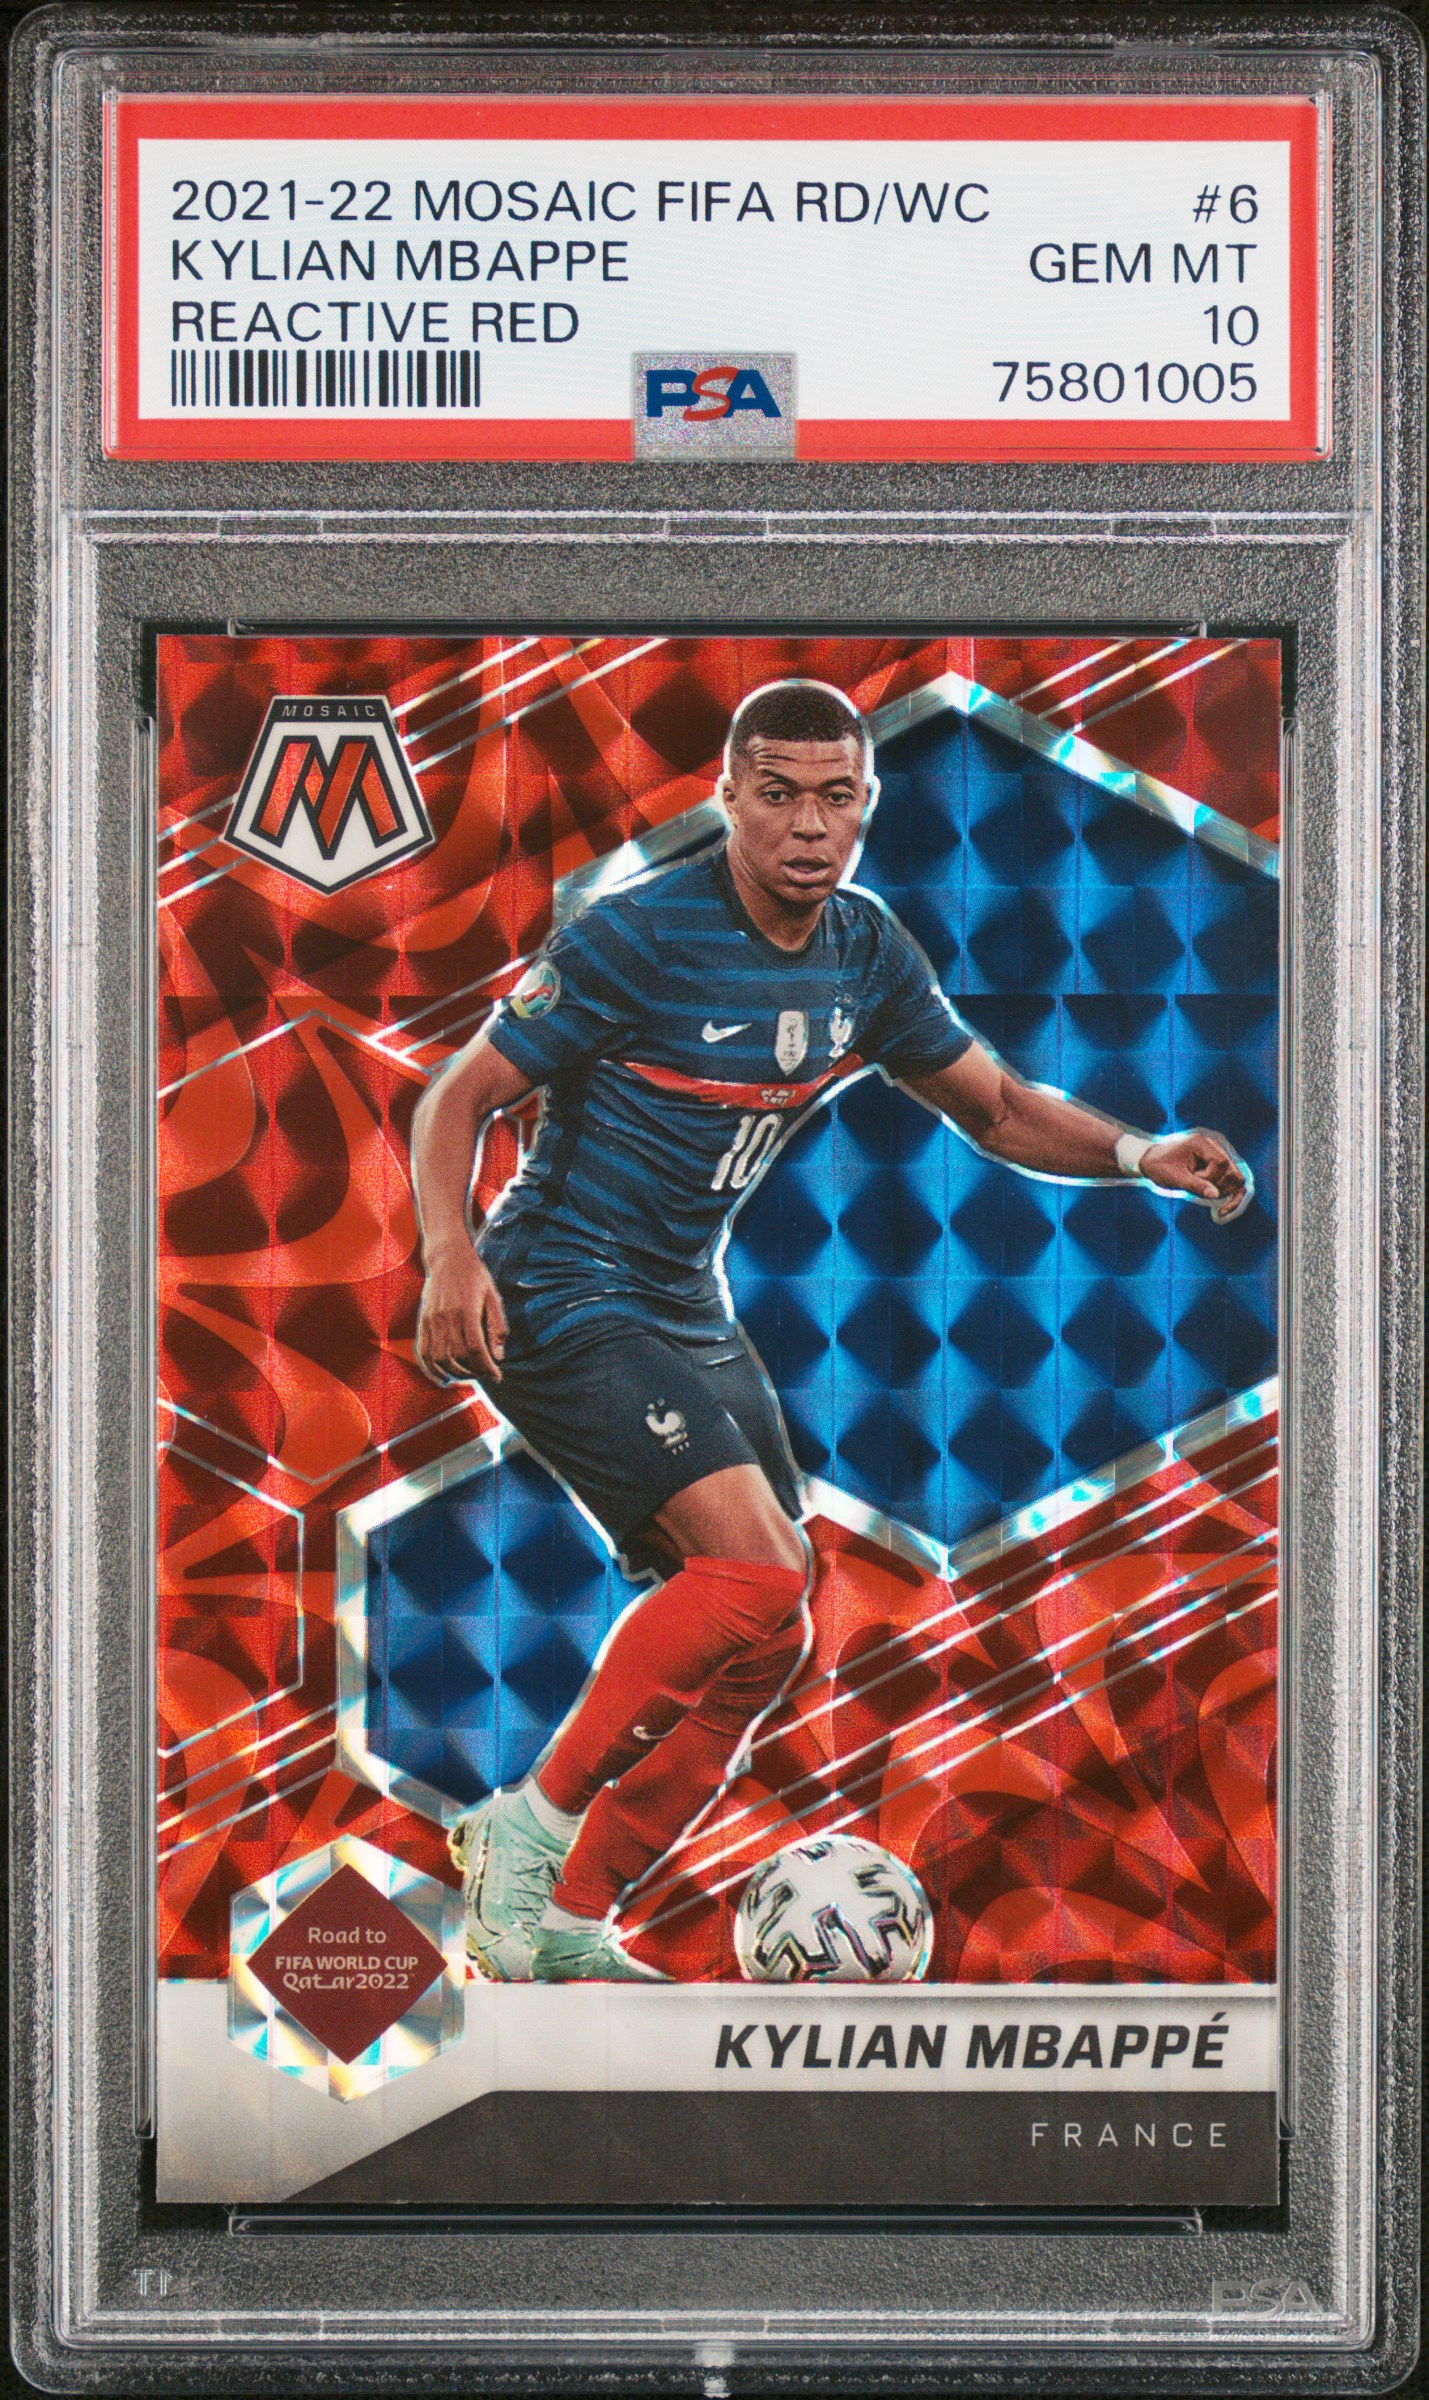 2021-22 Panini Mosaic FIFA Road To World Cup Reactive Red #6 Kylian Mbappe – PSA GEM MT 10